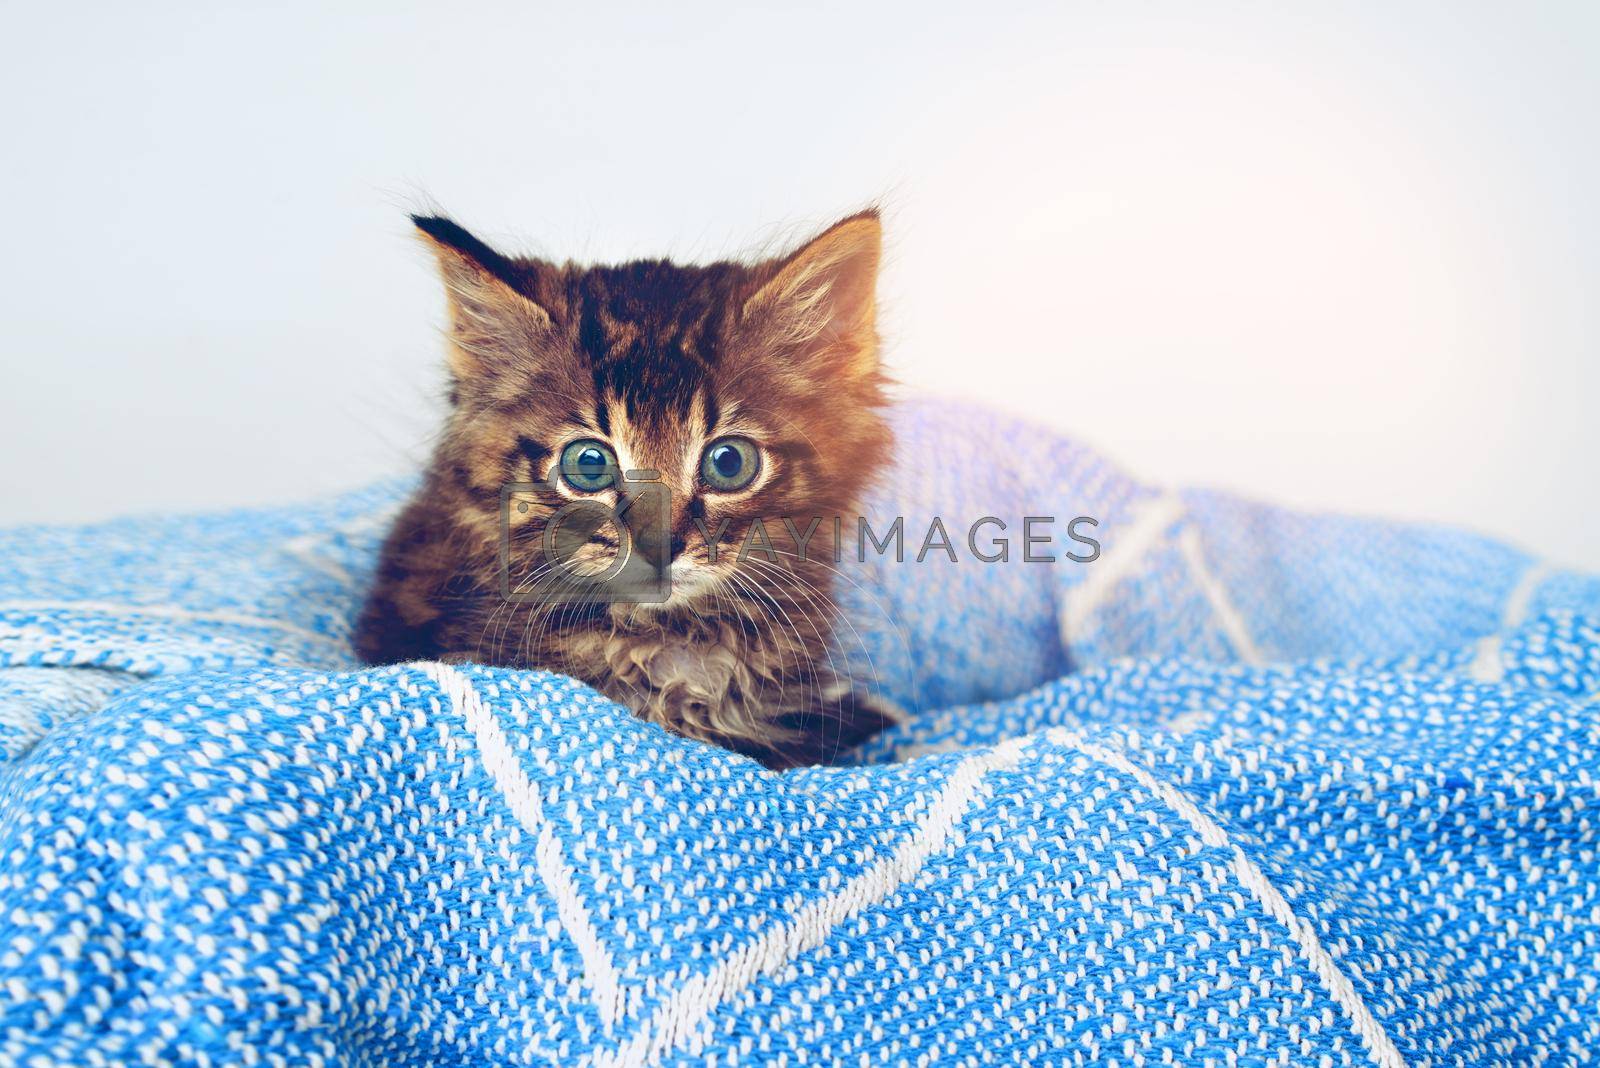 Royalty free image of The cutest kitty of them all. Studio shot of an adorable tabby kitten sitting on a soft blanket. by YuriArcurs